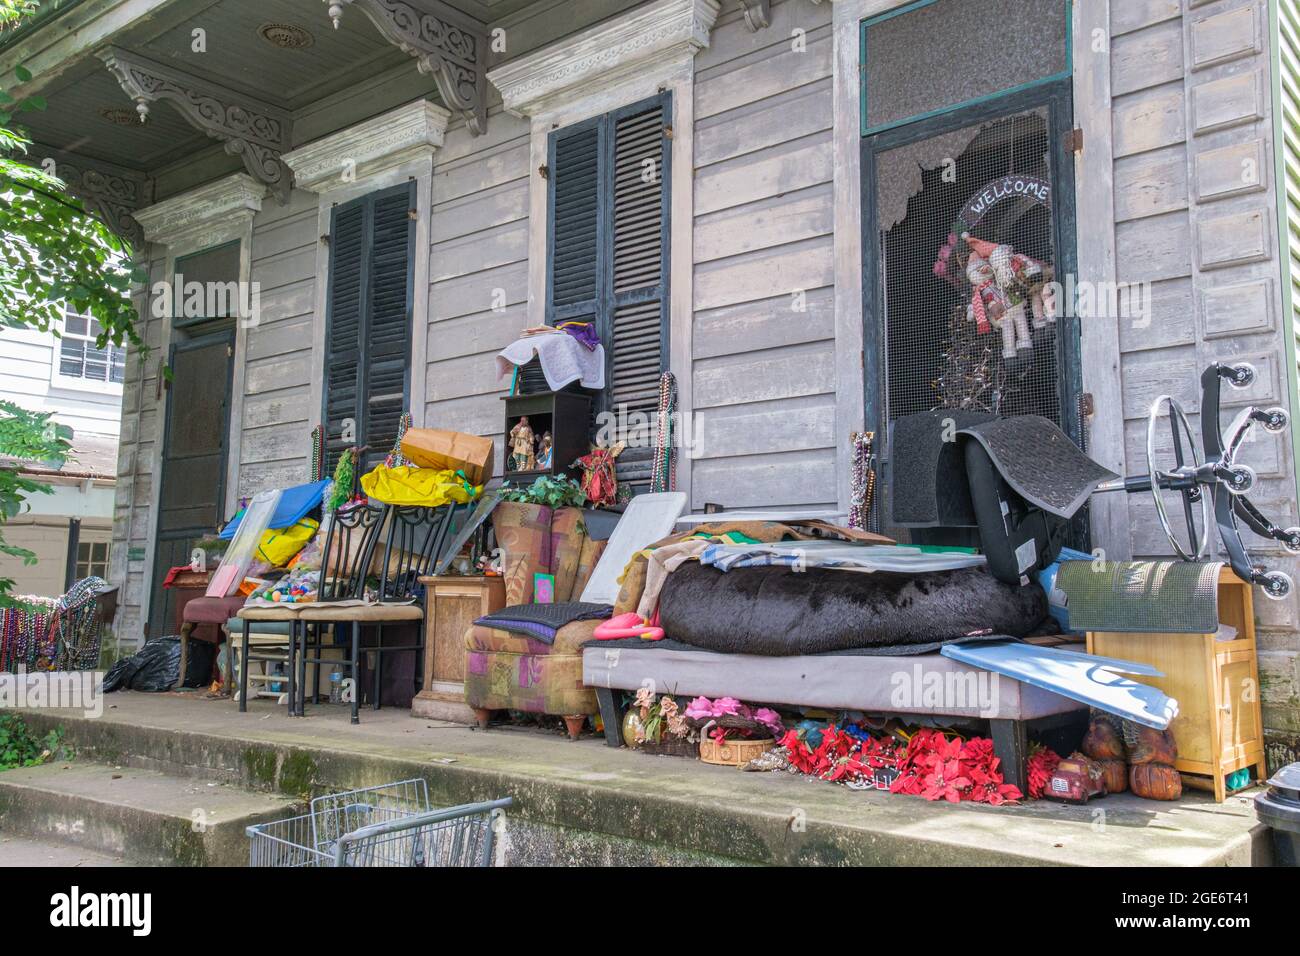 NEW ORLEANS, LA, USA - AUGUST 15, 2021: Dingy shotgun house with cluttered front porch in Uptown Neighborhood Stock Photo